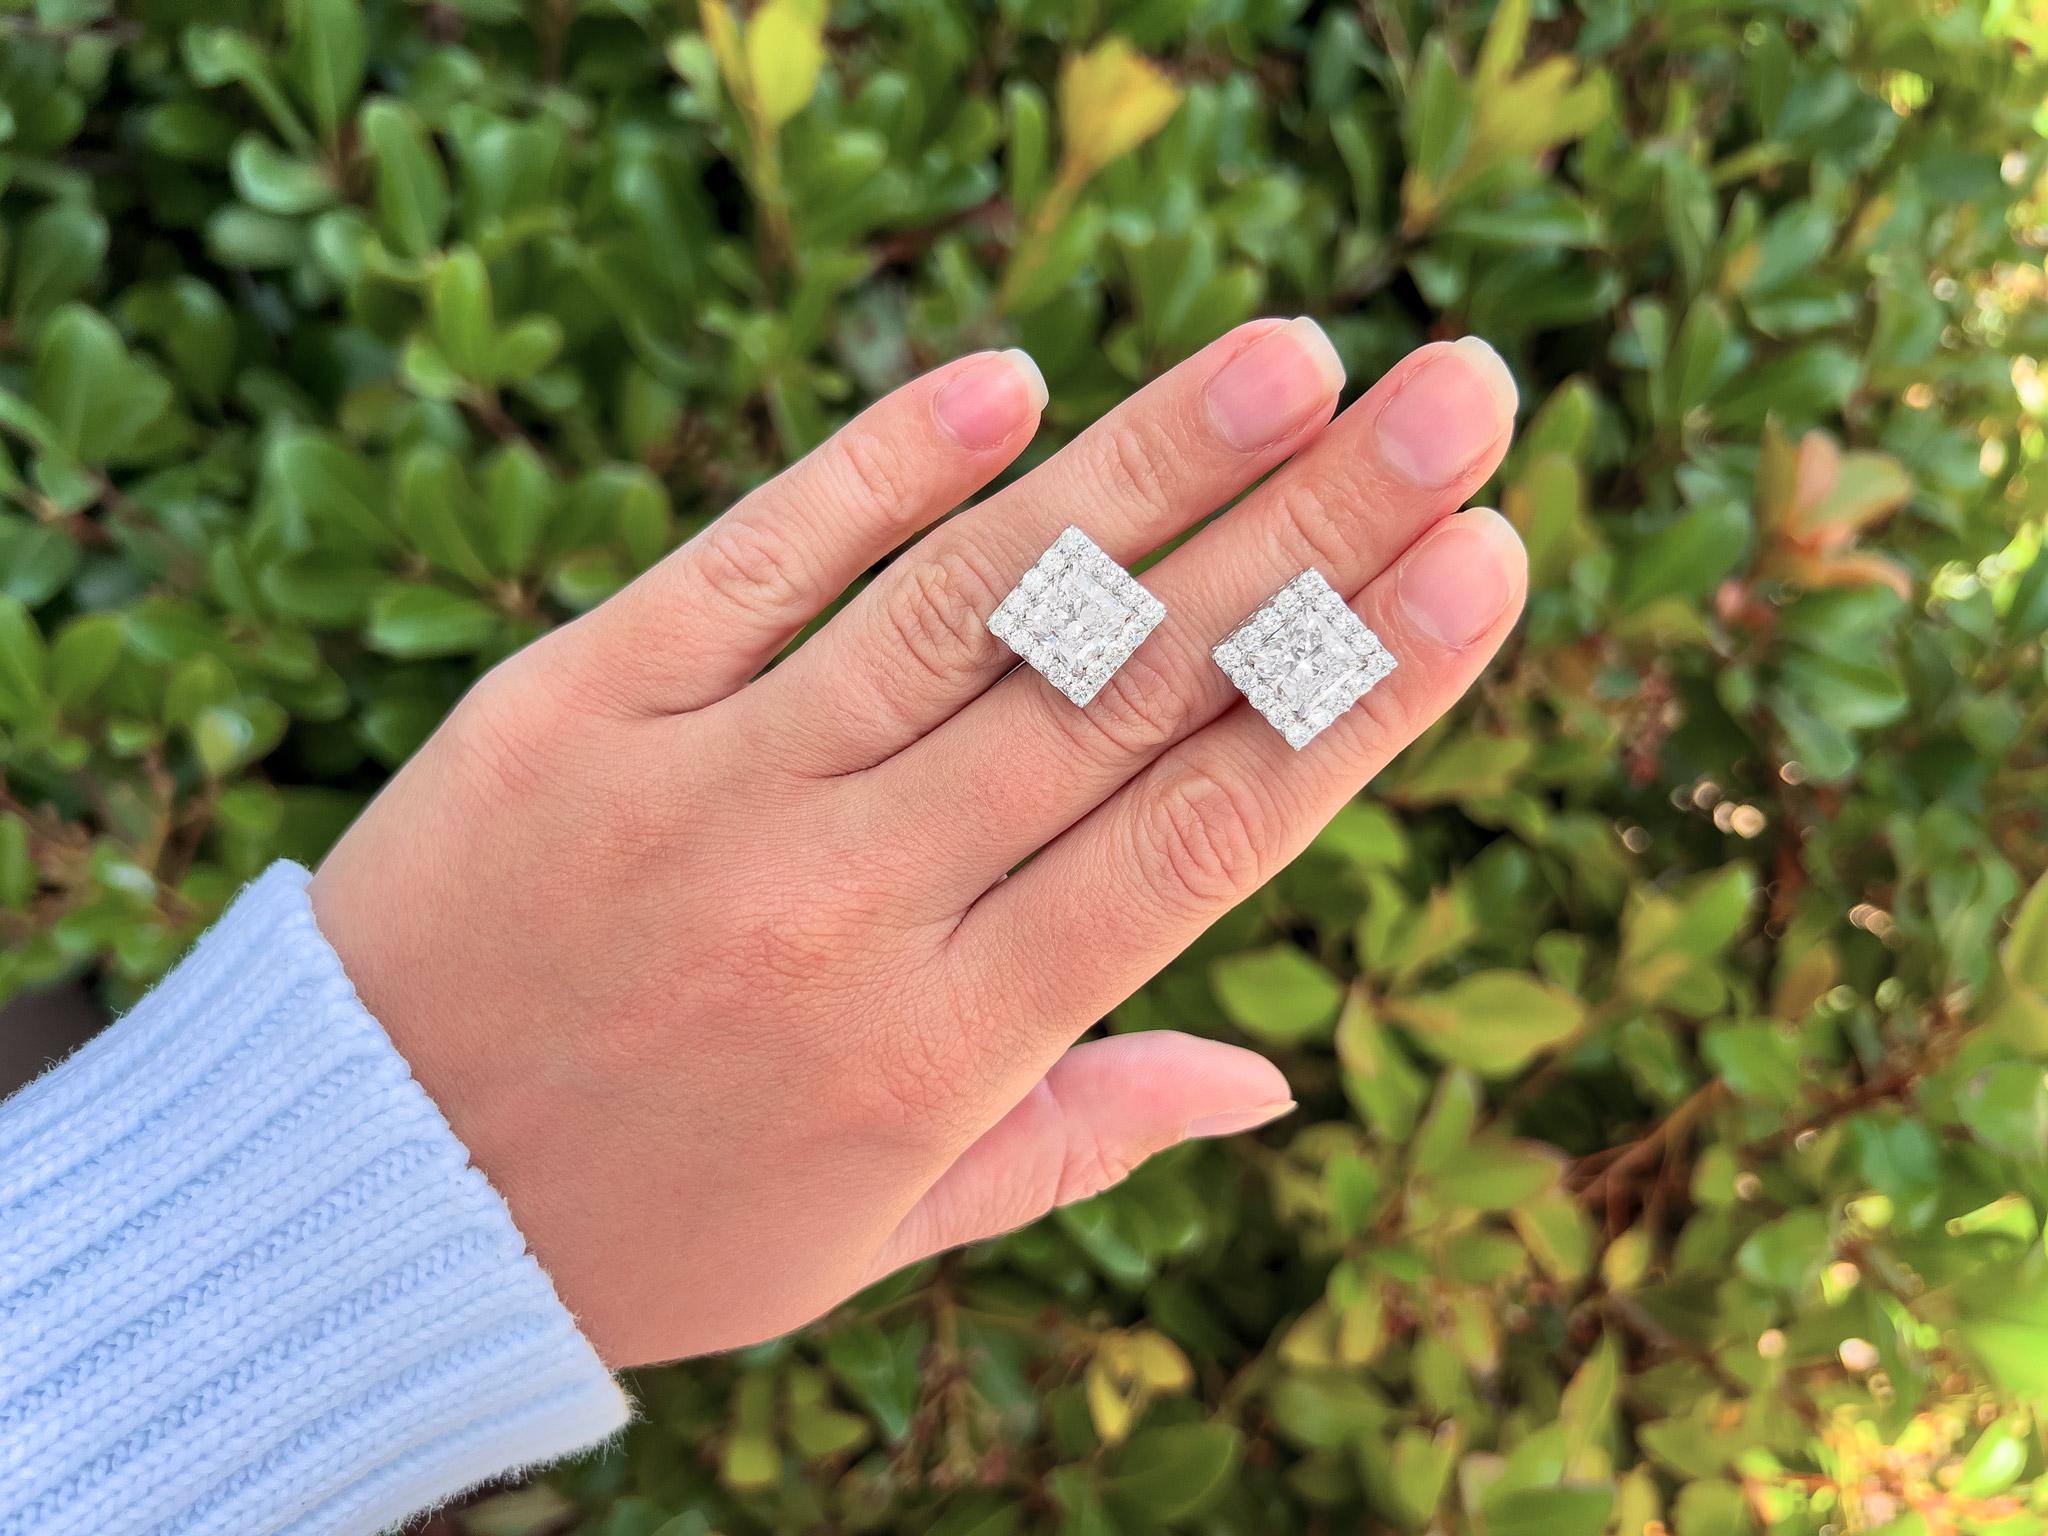 Princess Cut Diamond Stud Earrings 3+ Carat Each with Diamond Halo 18k Gold In Excellent Condition For Sale In Carlsbad, CA